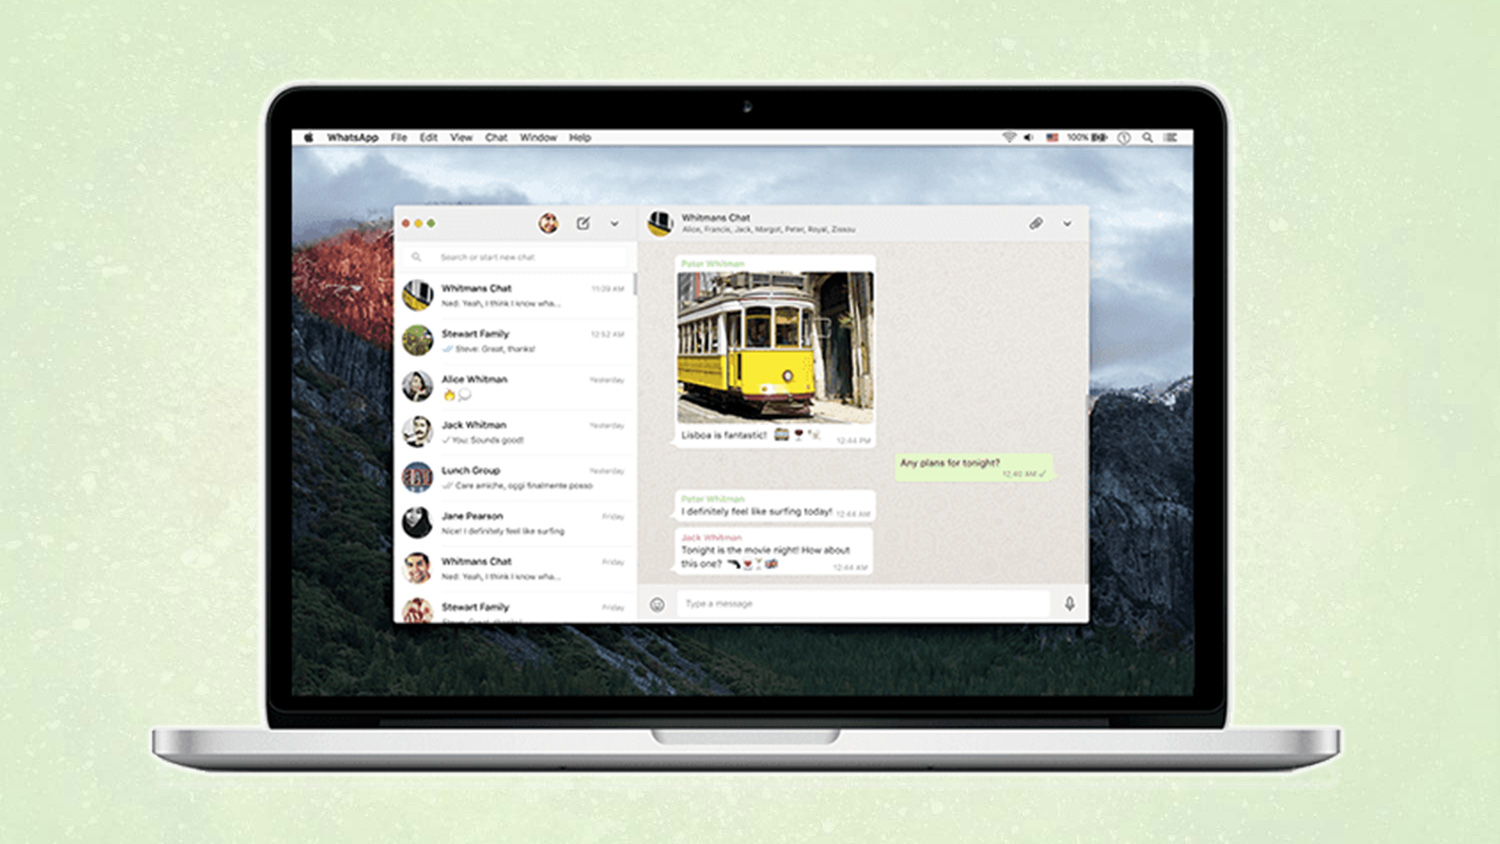 WhatsApp desktop app is now allowing you to send images in original quality